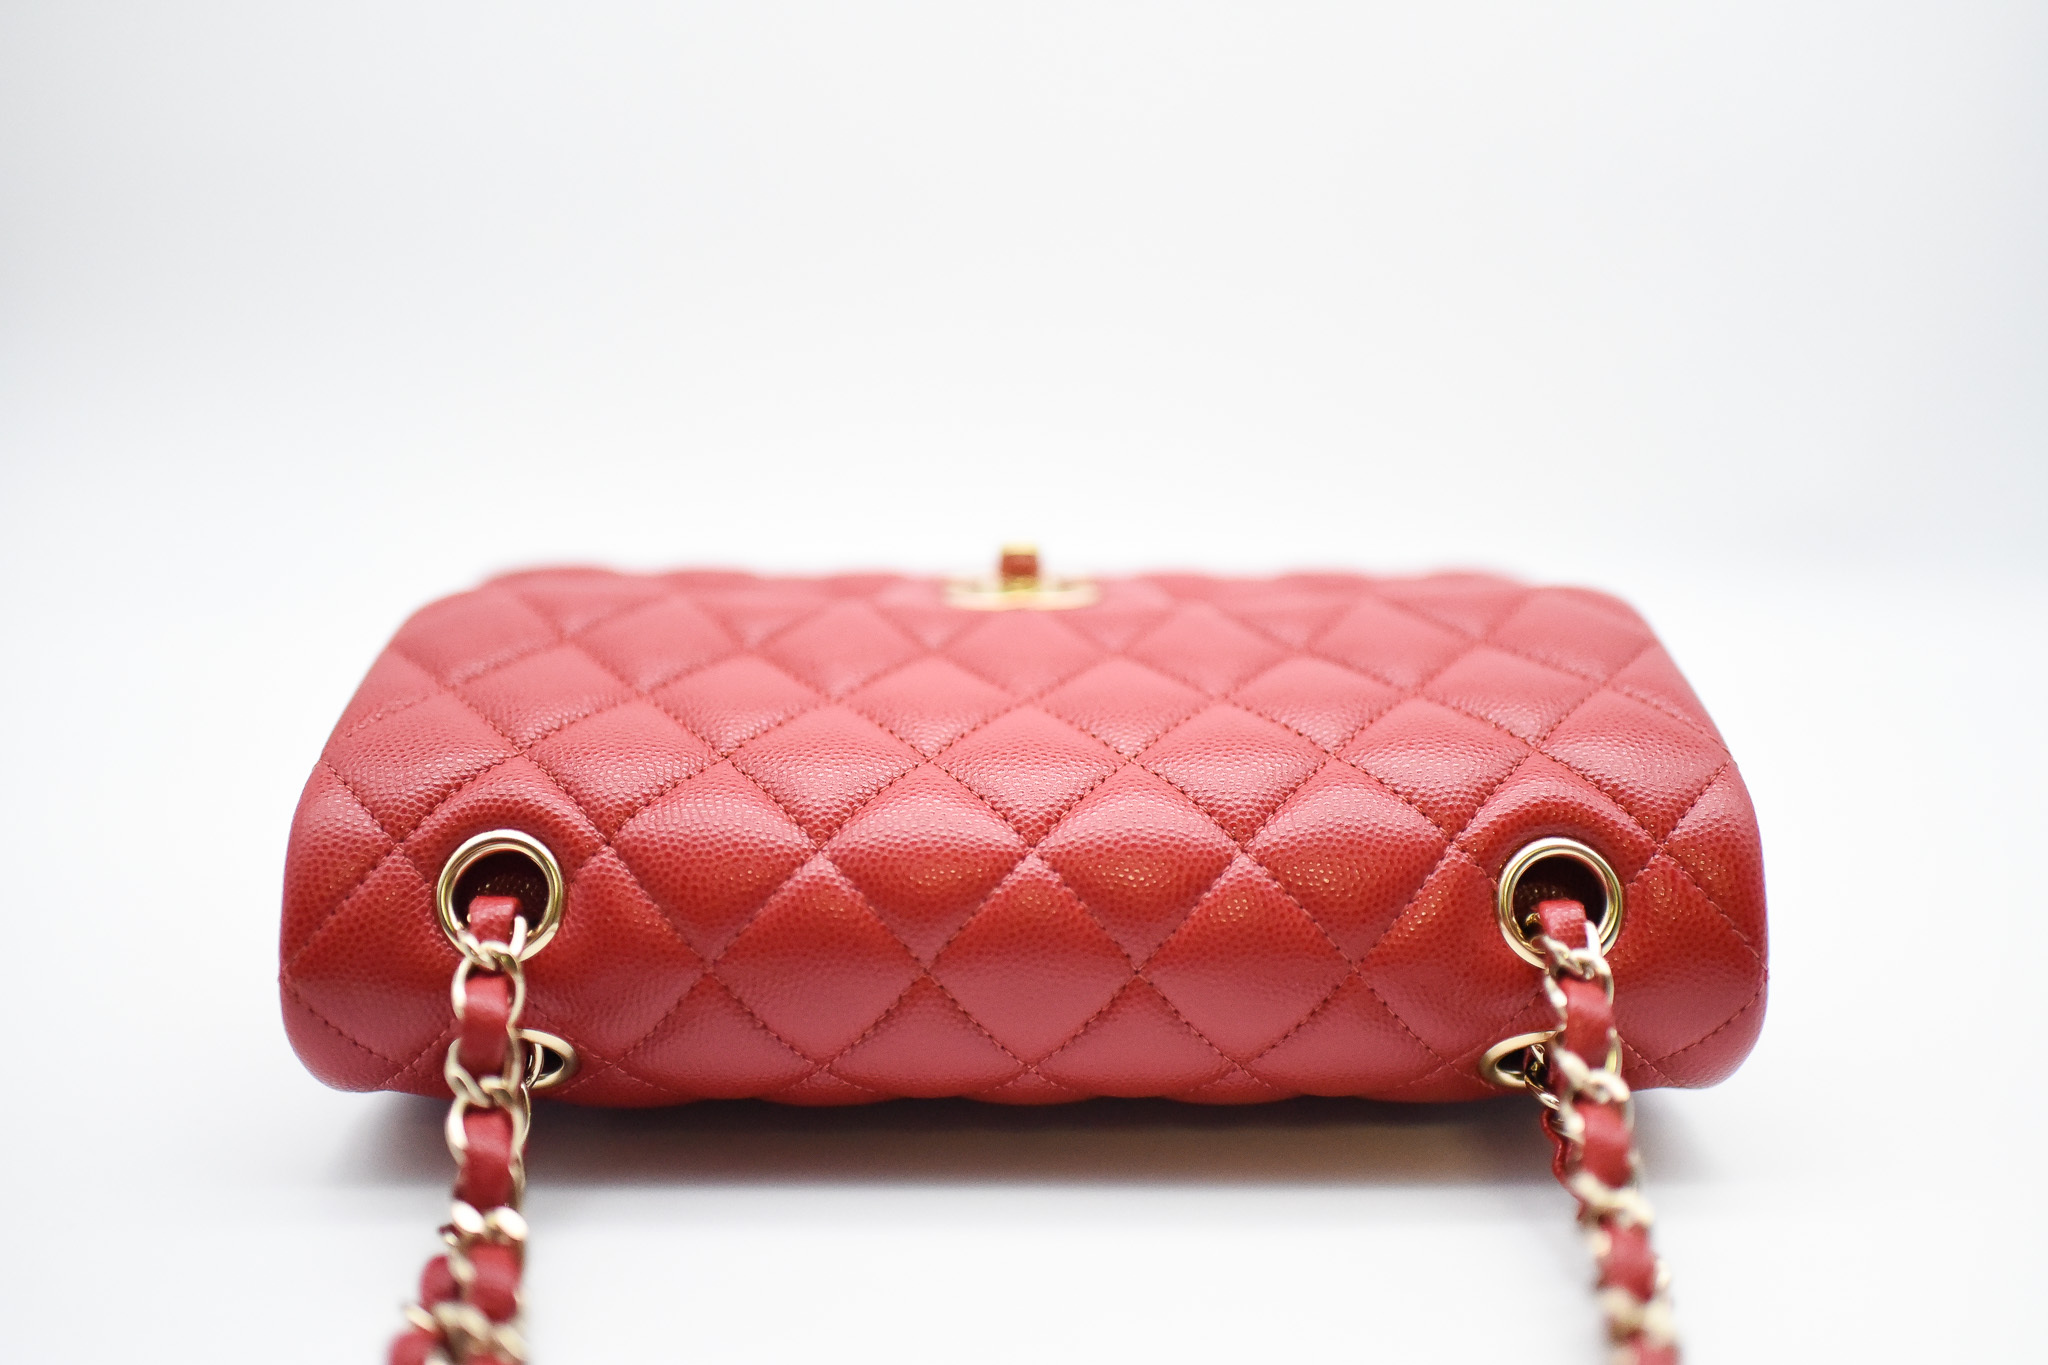 Chanel Classic Flap Small, Red Caviar Leather with Gold Hardware